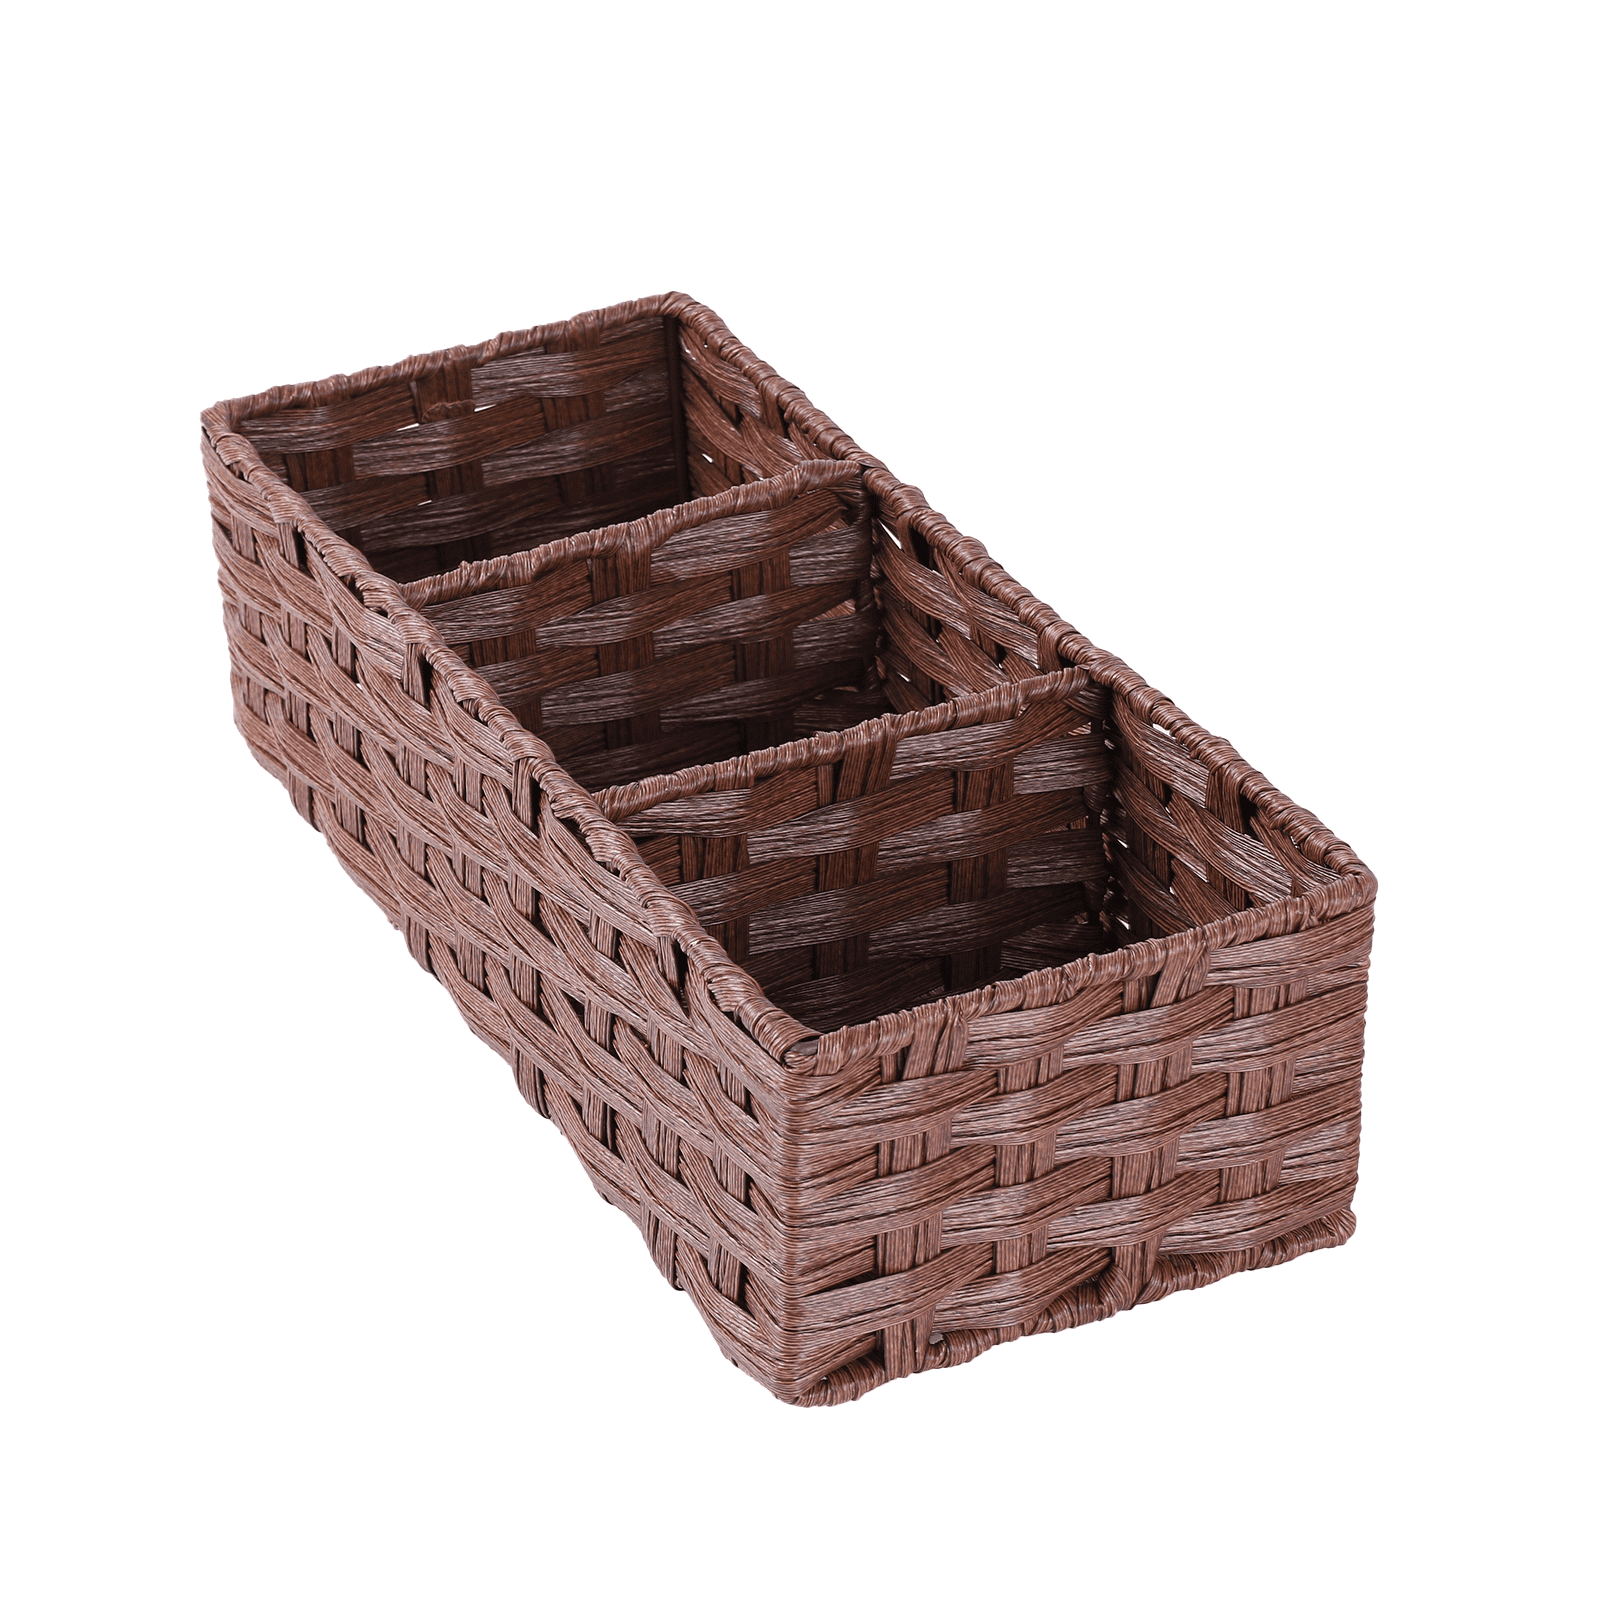 Dracelo Multiuse Hand Woven Plastic Wicker Basket with Divider for Organizing, Countertop Organizer Storage, Brown